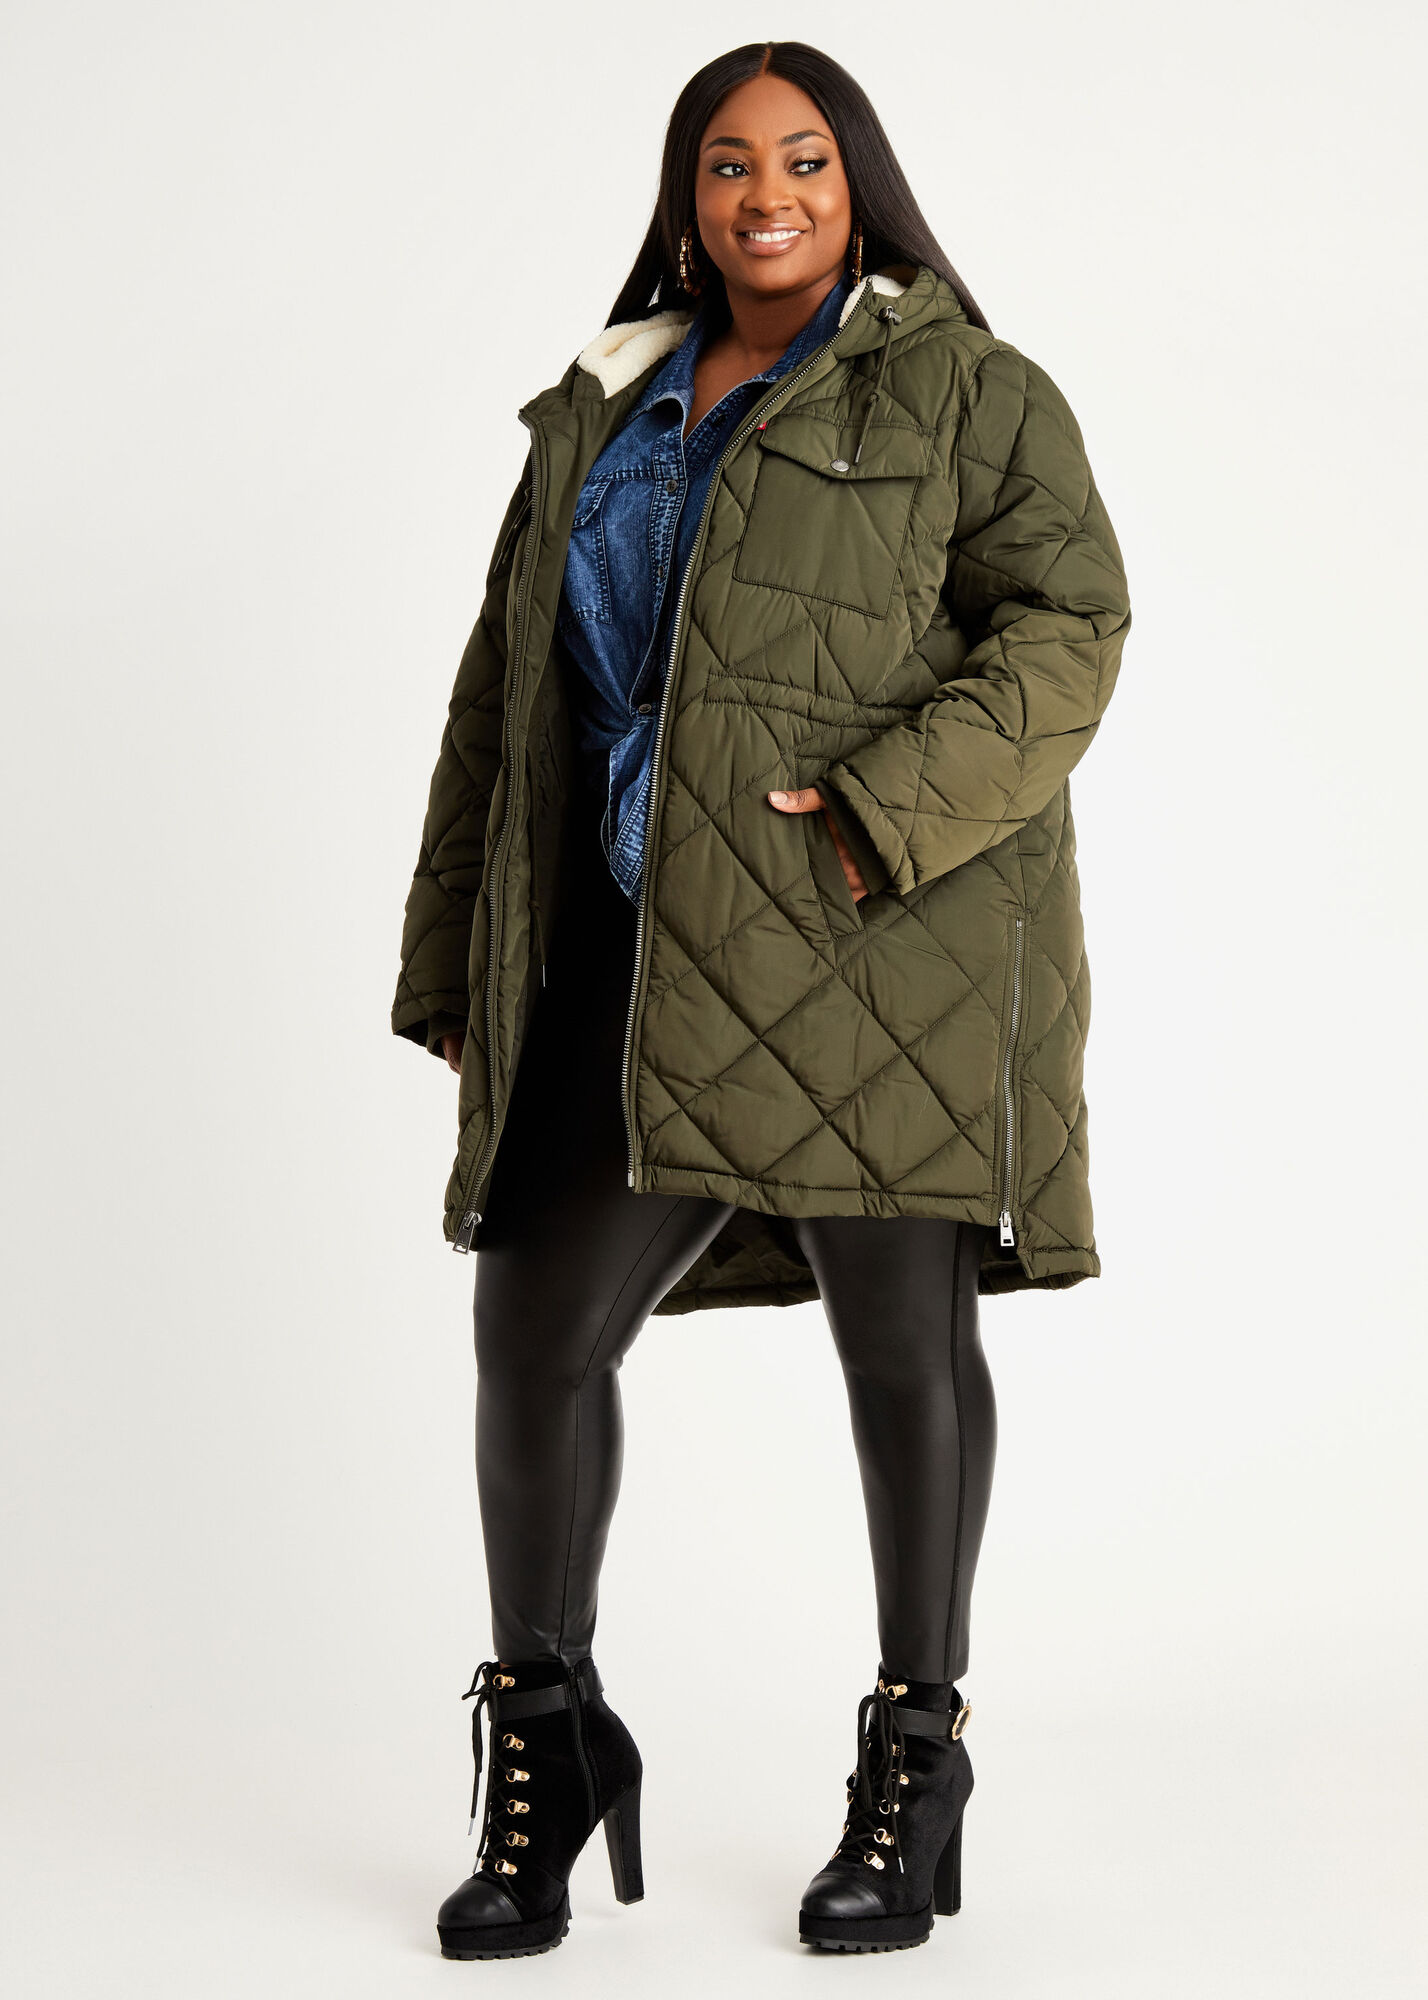 Plus Size Levi's Diamond Quilted Water Repellant Cozy Warm Parka Coat